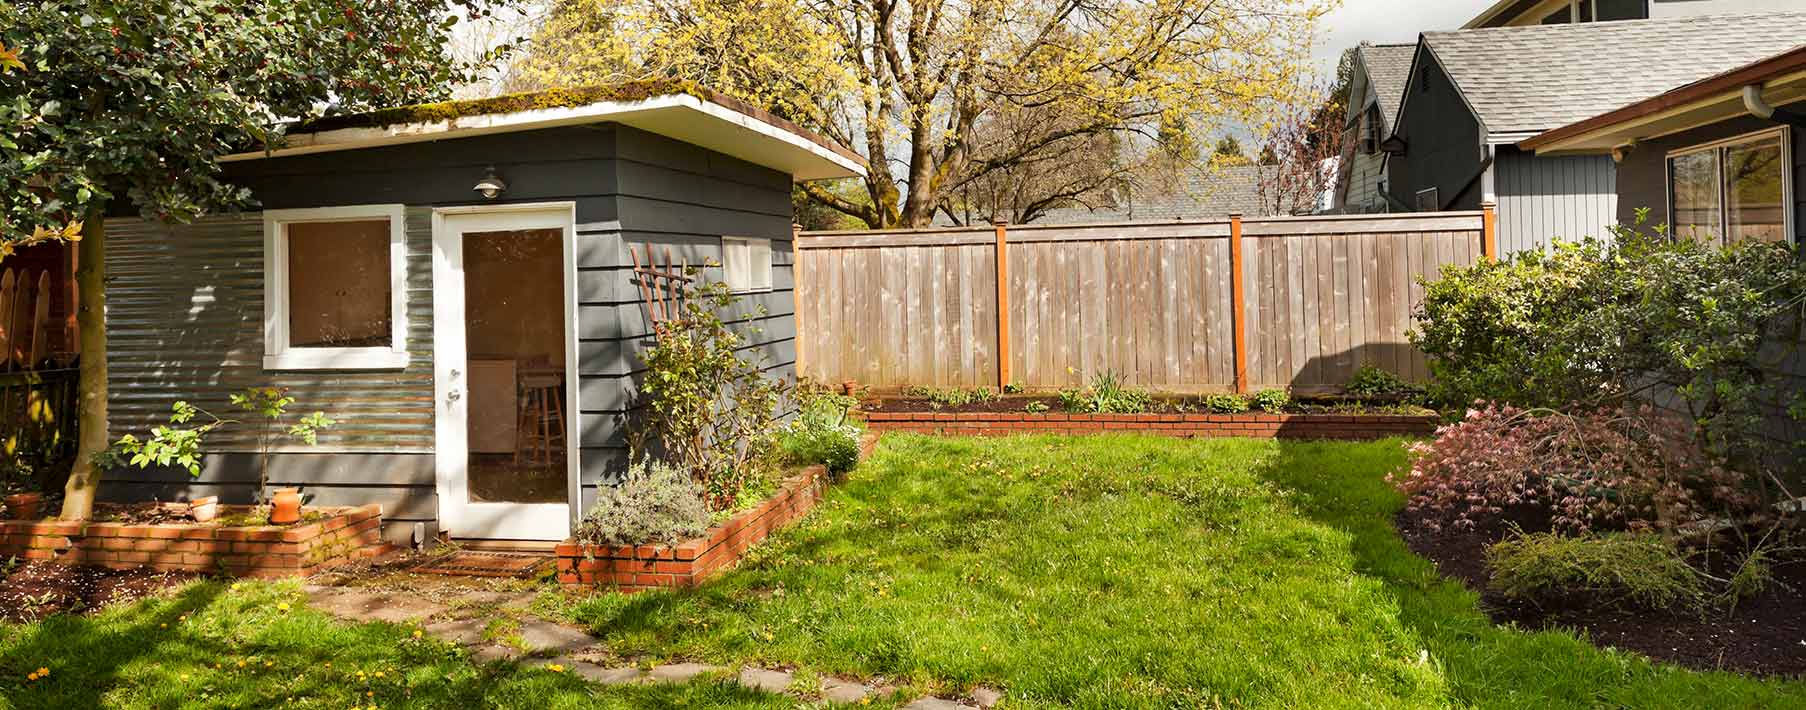 A garden shed sits in a lush, green yard.